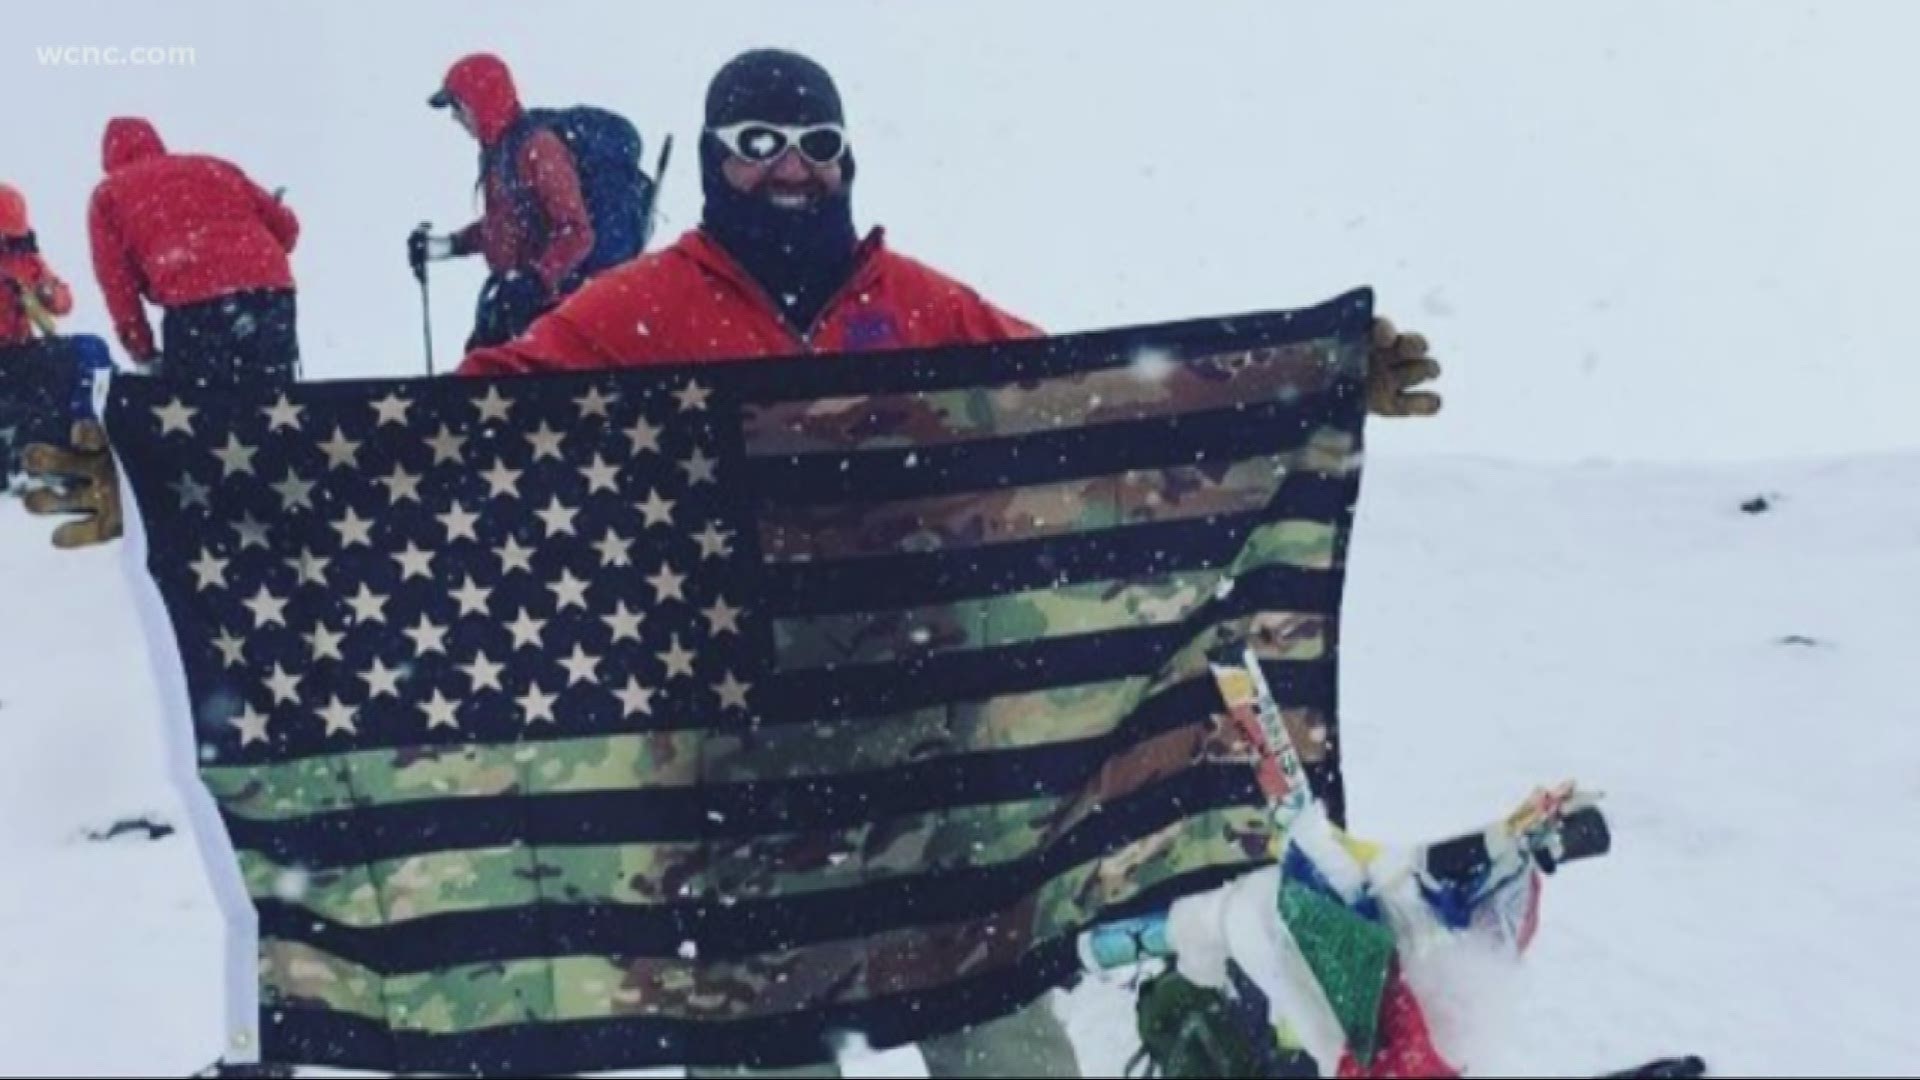 After Benjamin Breckheimer was wounded while deployed then divorced, he chose to pursue adventure. Breckheimer set out to climb the highest mountain on every continent.